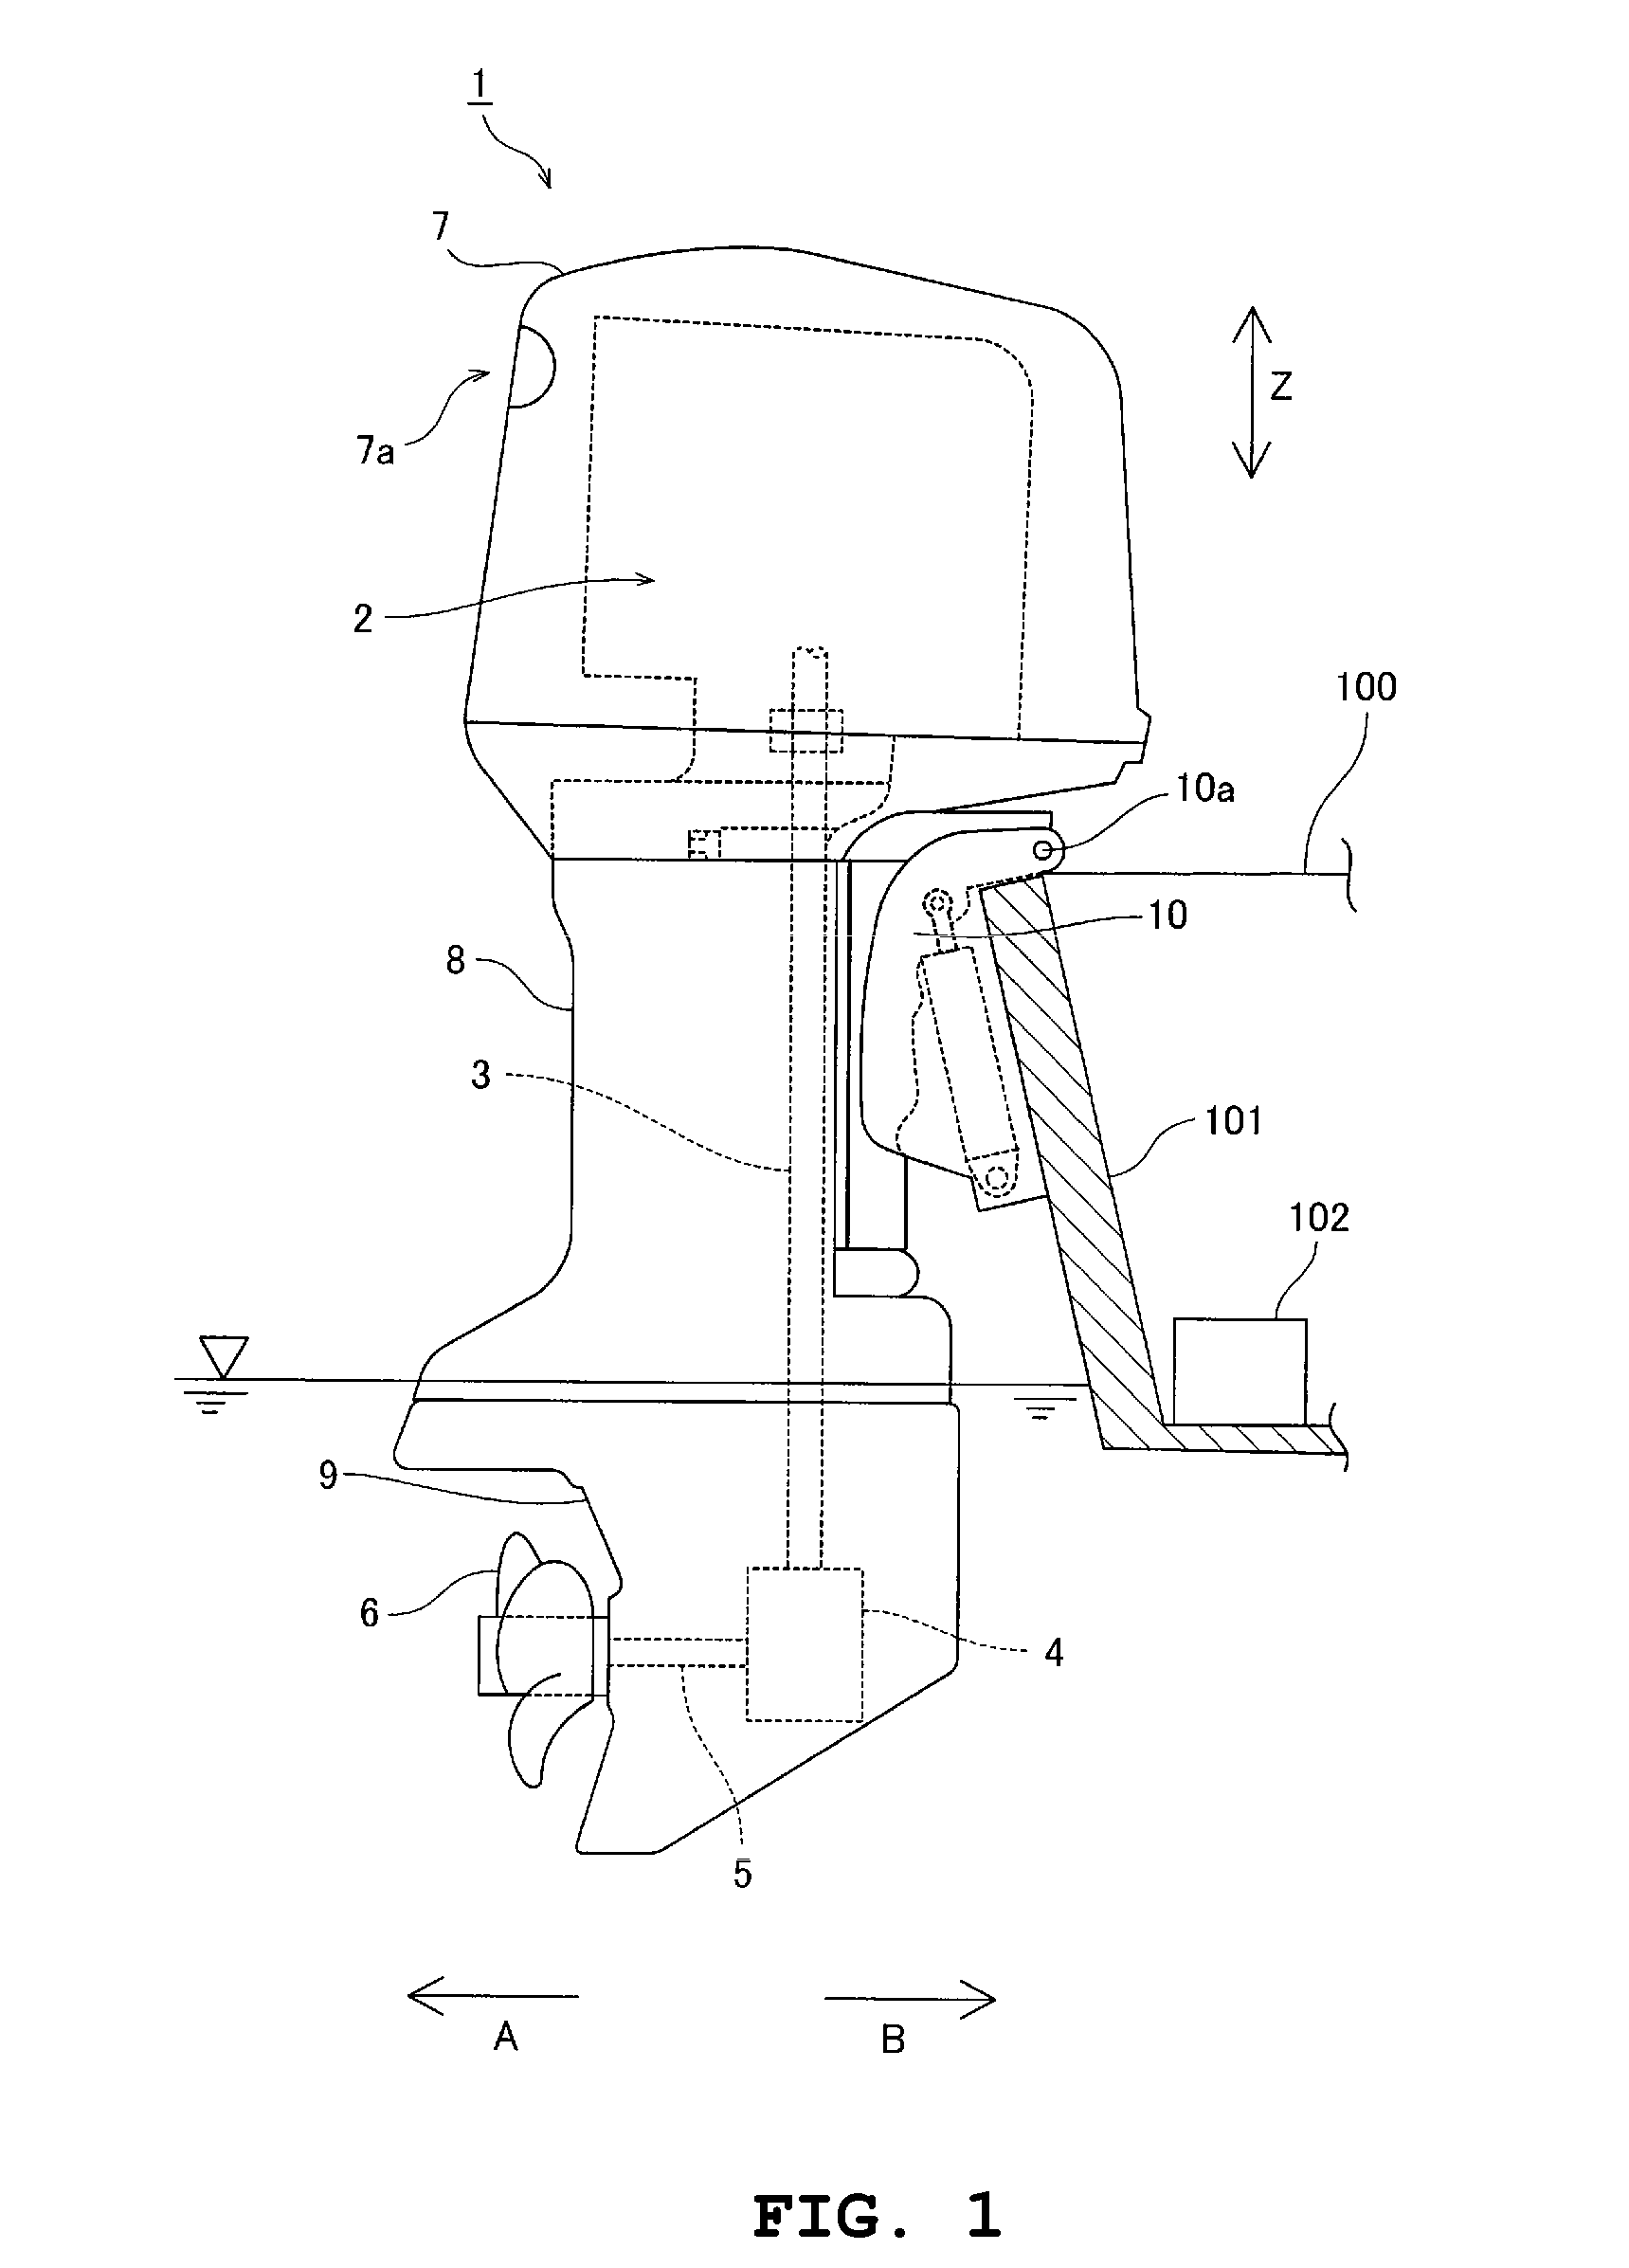 Fuel supply system for boat and outboard motor